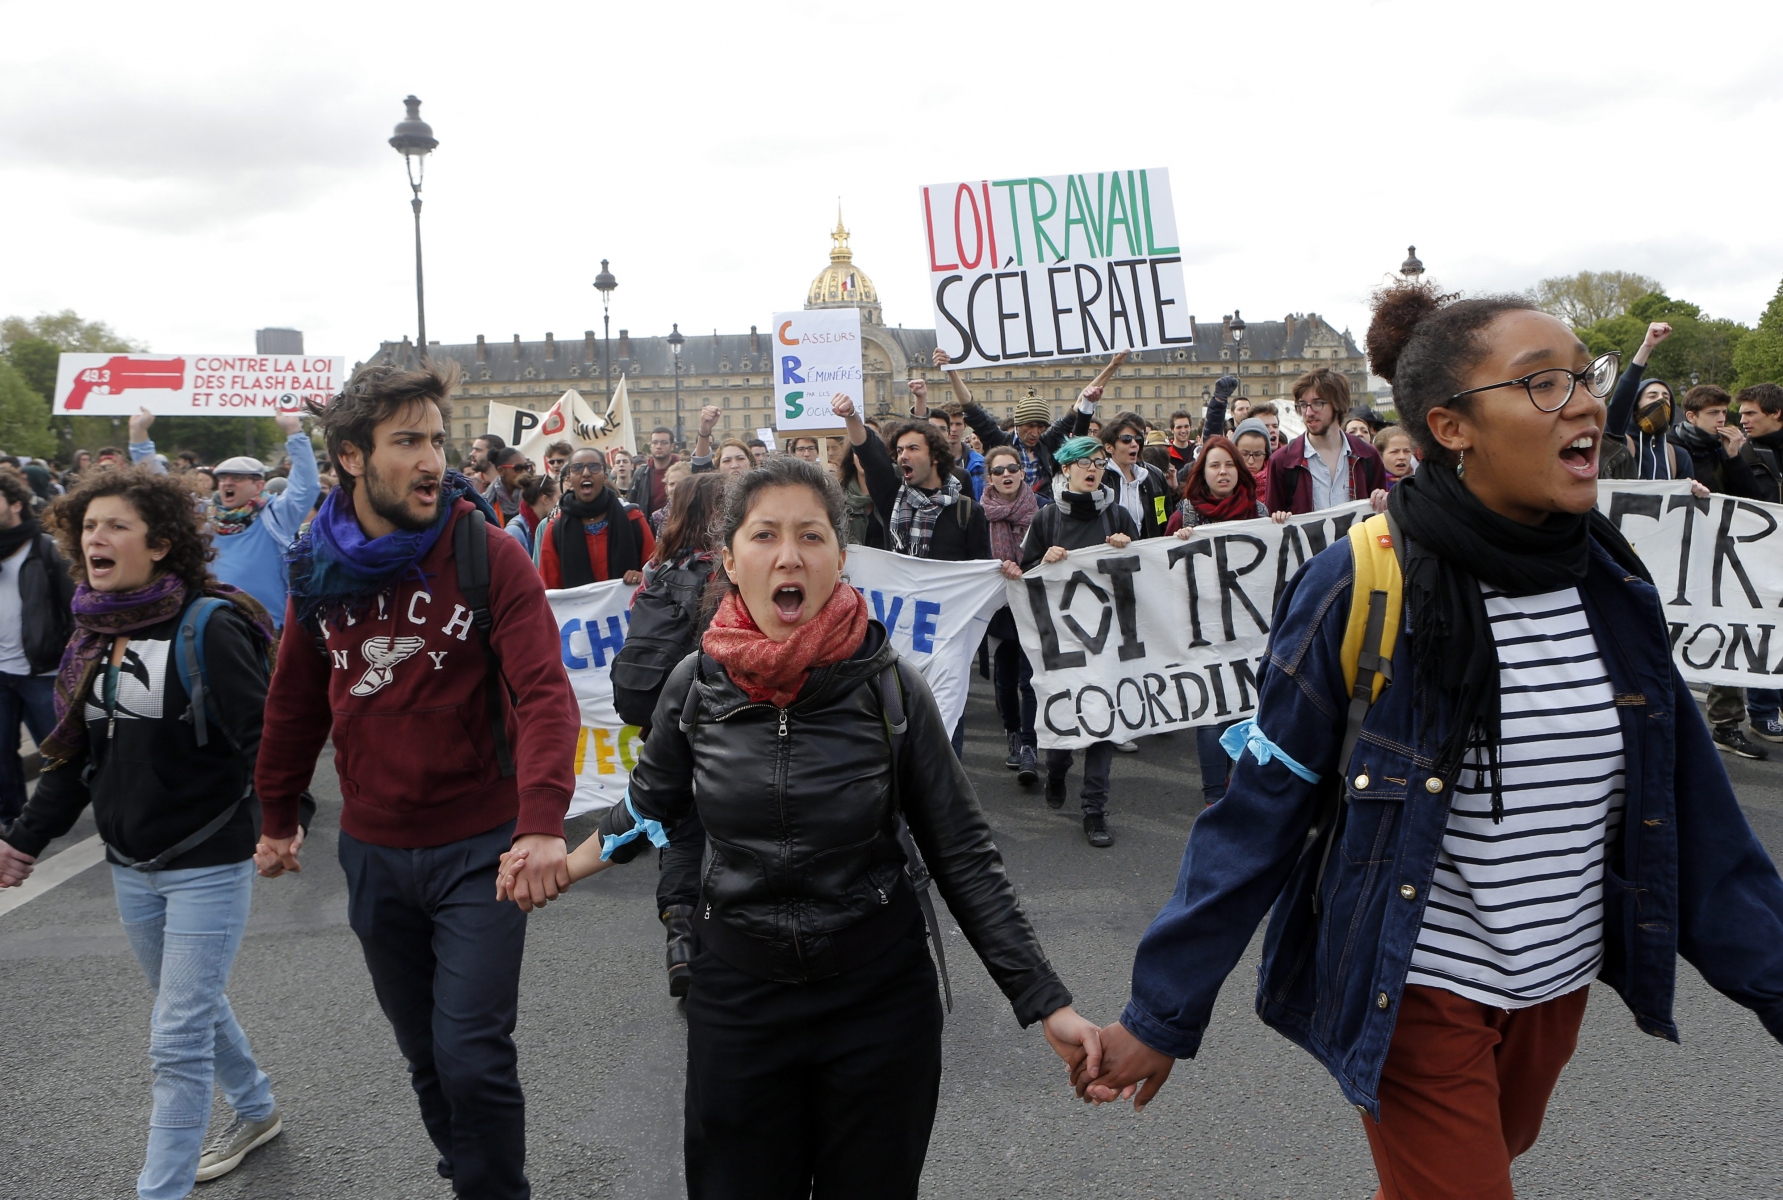 Students demonstrate against a labor bill that would make it easier to lay off workers and weaken some union powers, Tuesday, May 3, 2016 in Paris. After a month of often violent protests, French legislators on Tuesday started to debate a hotly contested labor bill that would make it easier to lay off workers, weaken some union powers, and relax rules regulating the country's 35-hour workweek. (AP Photo/Francois Mori) France Labor Law